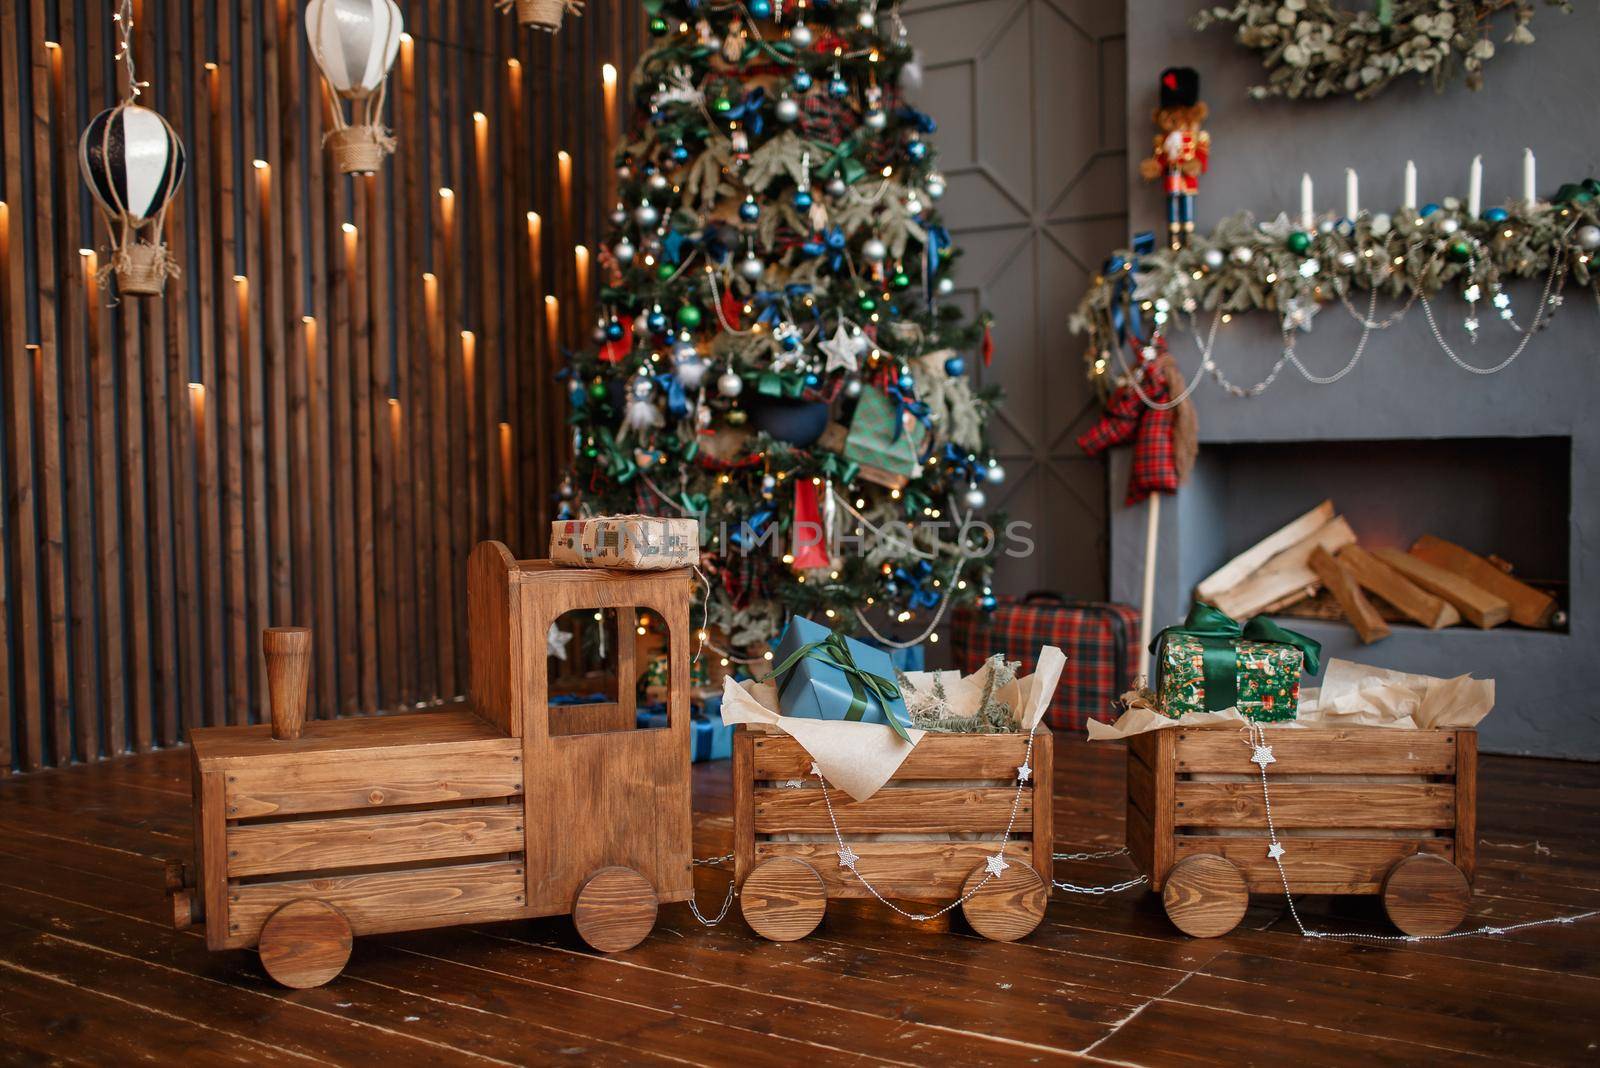 A full-length wooden steam locomotive in a Christmas photo studio.